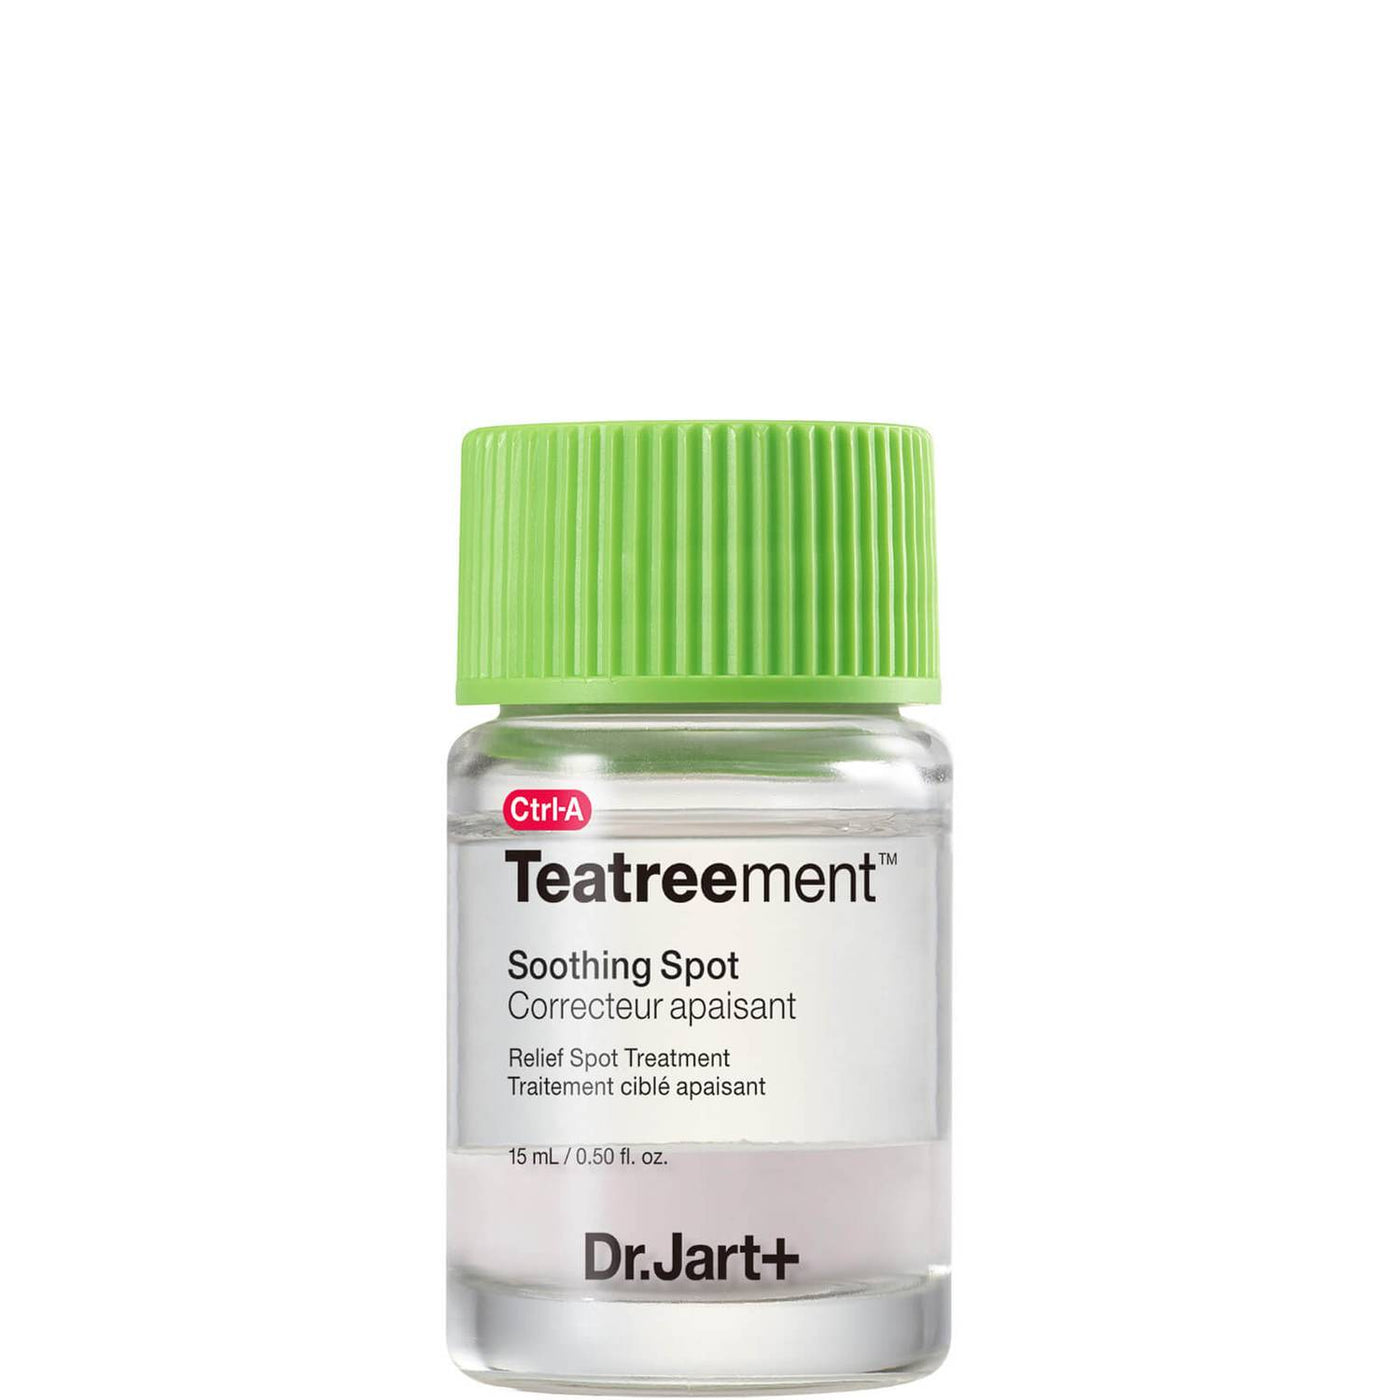 [Dr.Jart+] Tratamento para Acne Teatreement Soothing Spot 15ml 🇰🇷